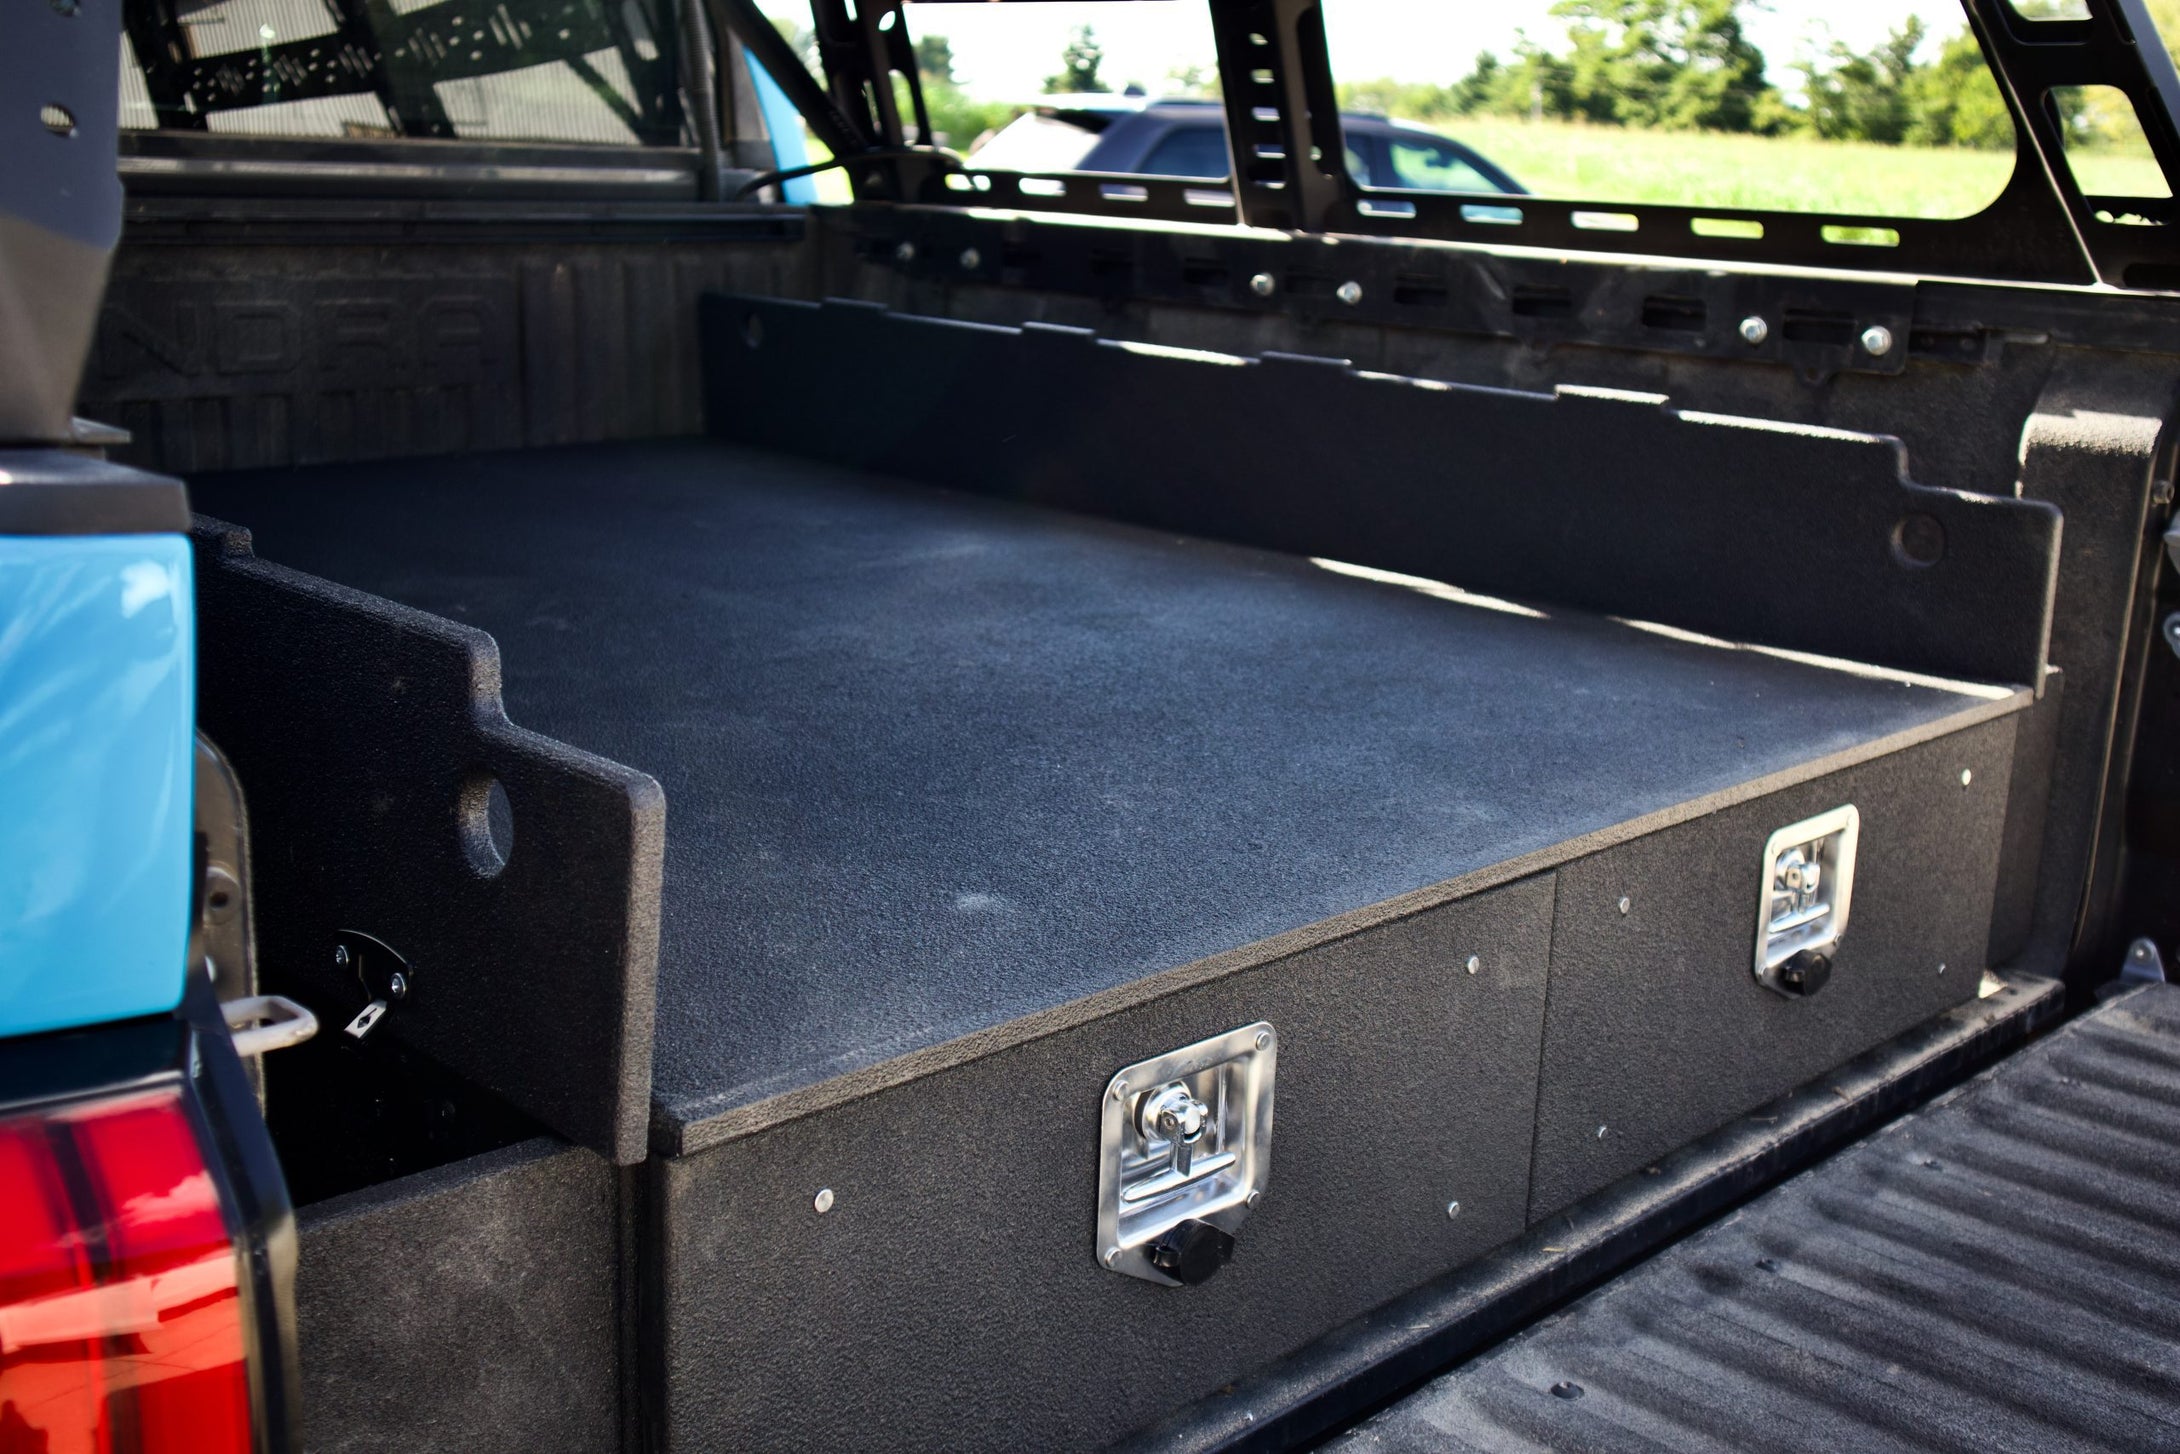 SHW Off-road - 2.5 Gen Tundra Composite Drawer System